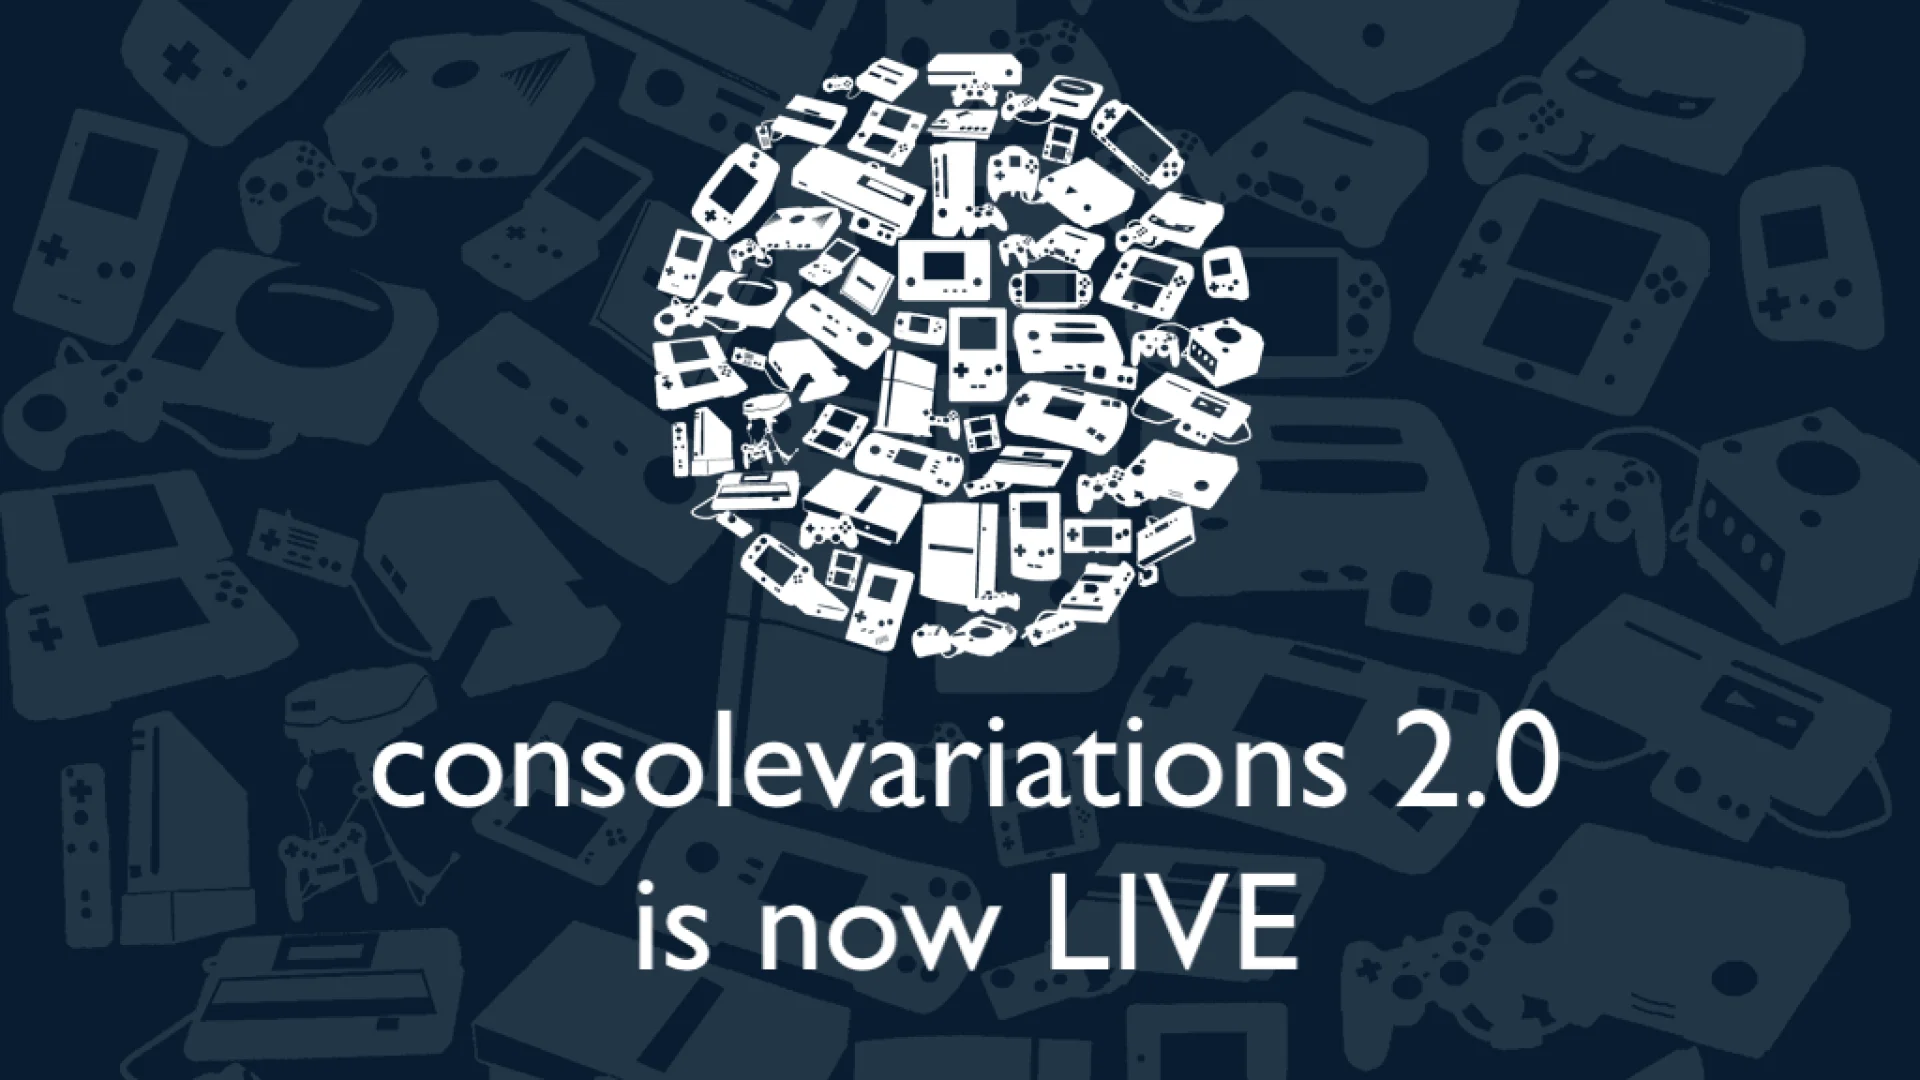 The all new consolevariations.com is now live!